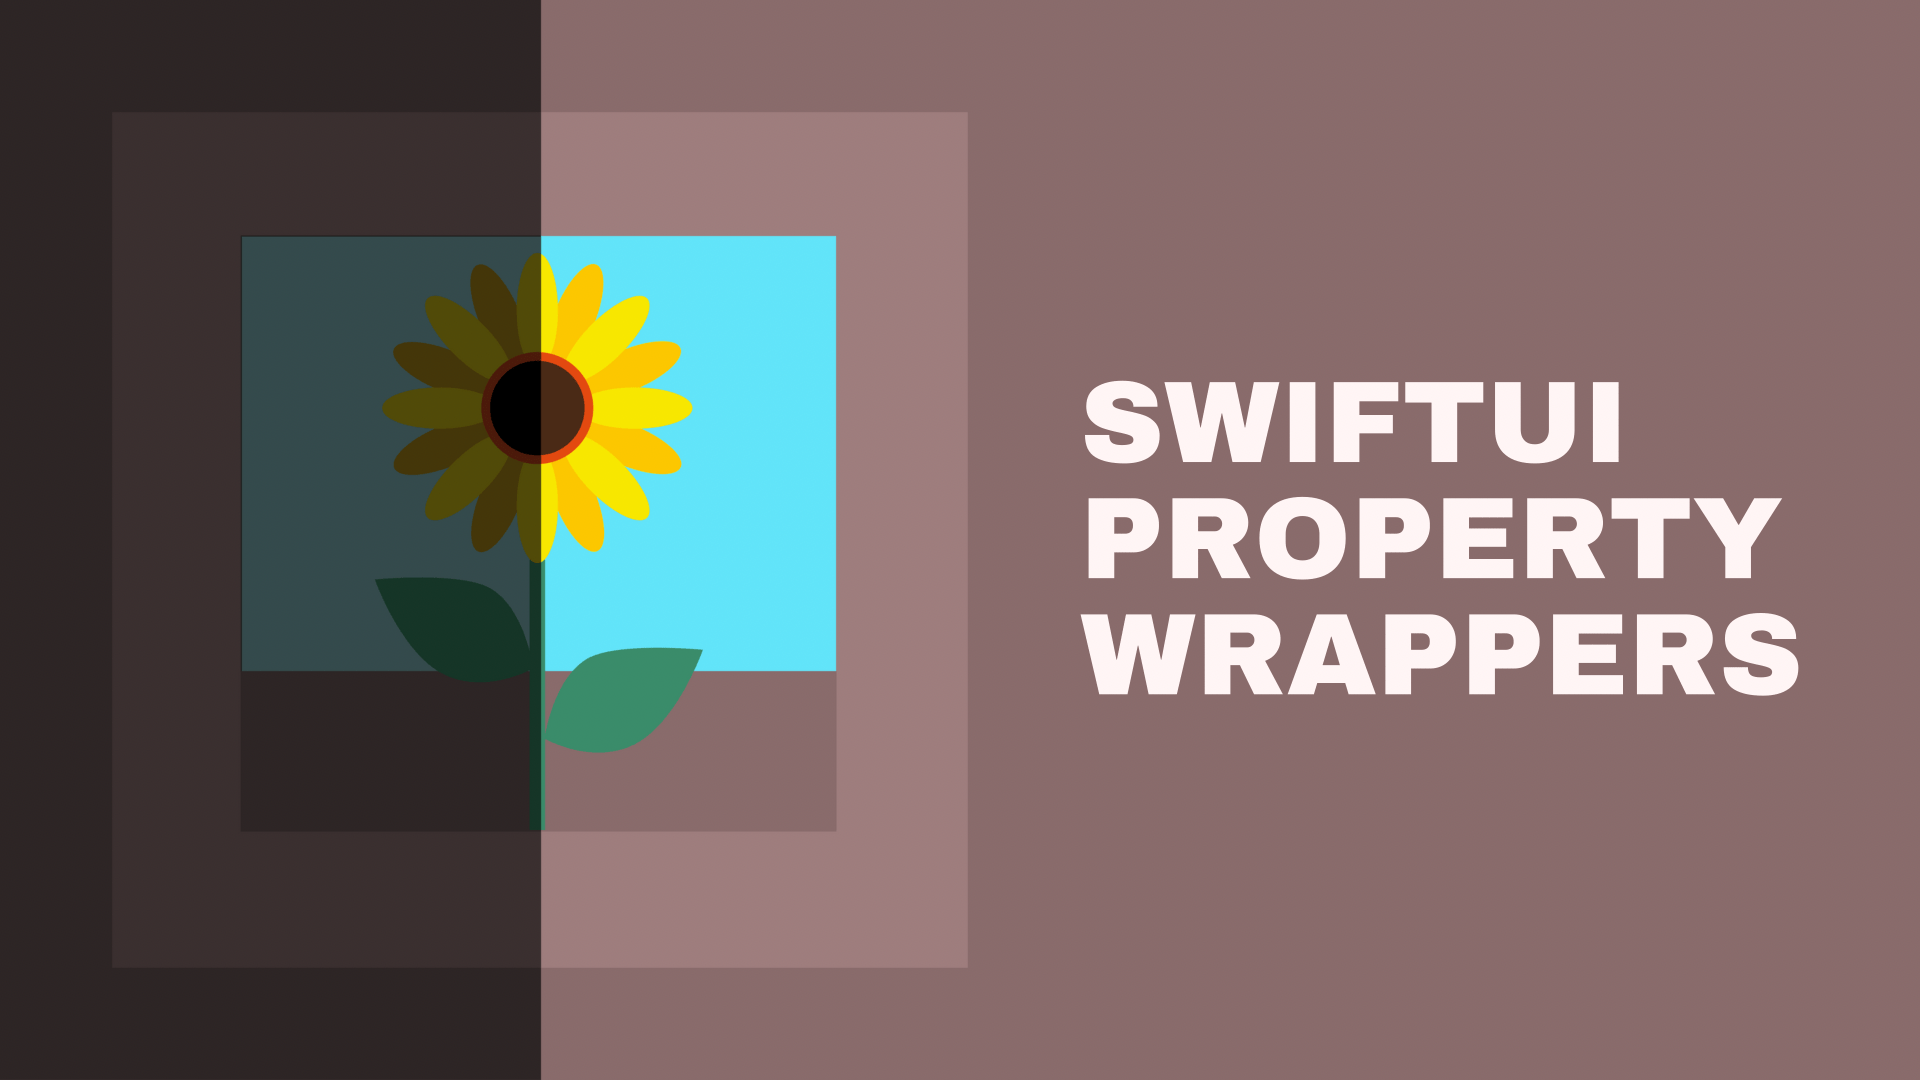 SwiftUI Property Wrappers